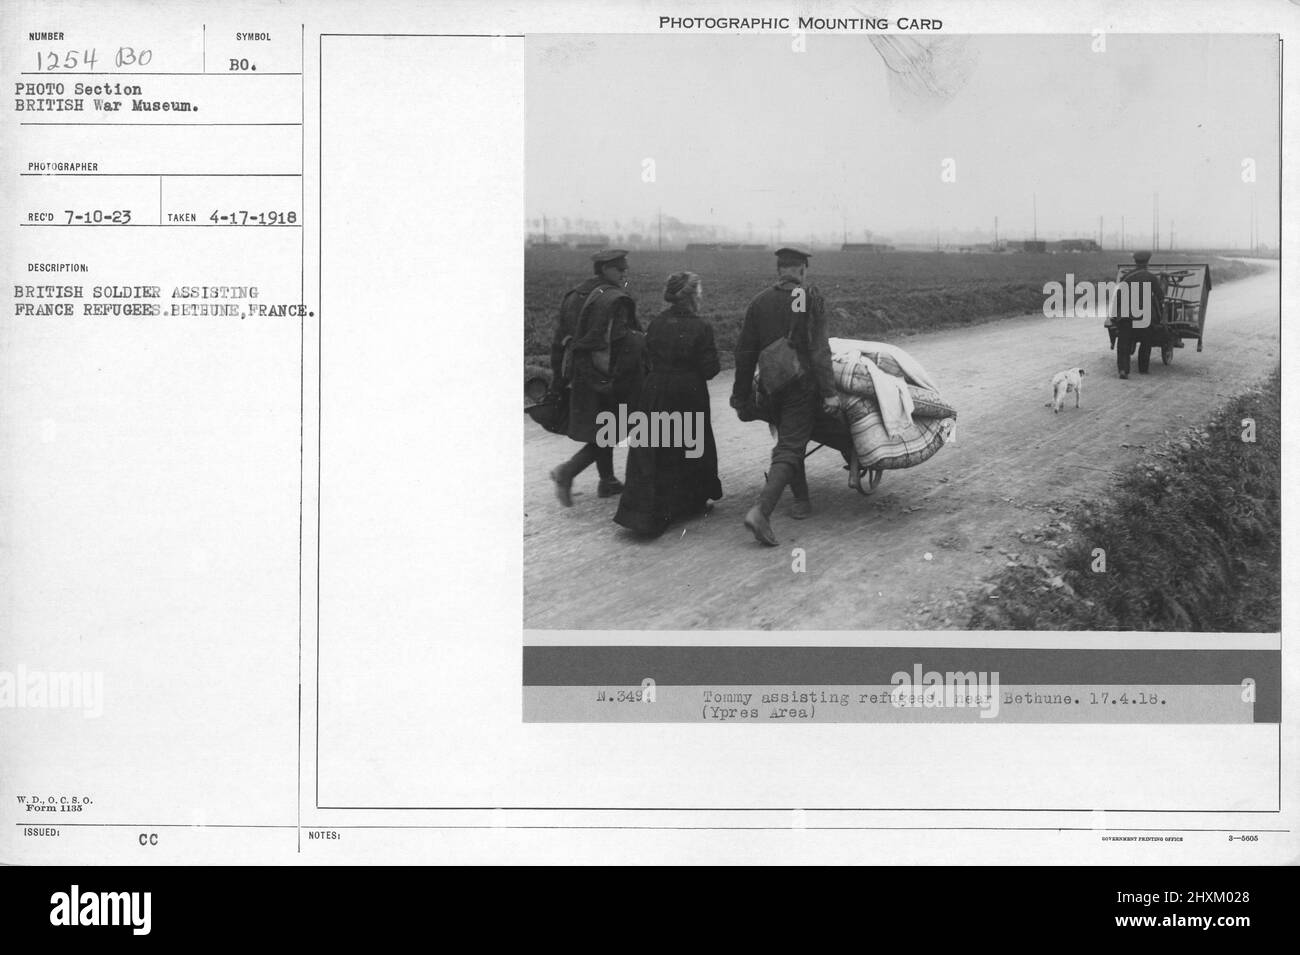 British soldier assisting France refugees. Bethune, France. 4-17-1918. Collection of World War I Photographs, 1914-1918 that depict the military activities of British and other nation's armed forces and personnel during World War I. Stock Photo